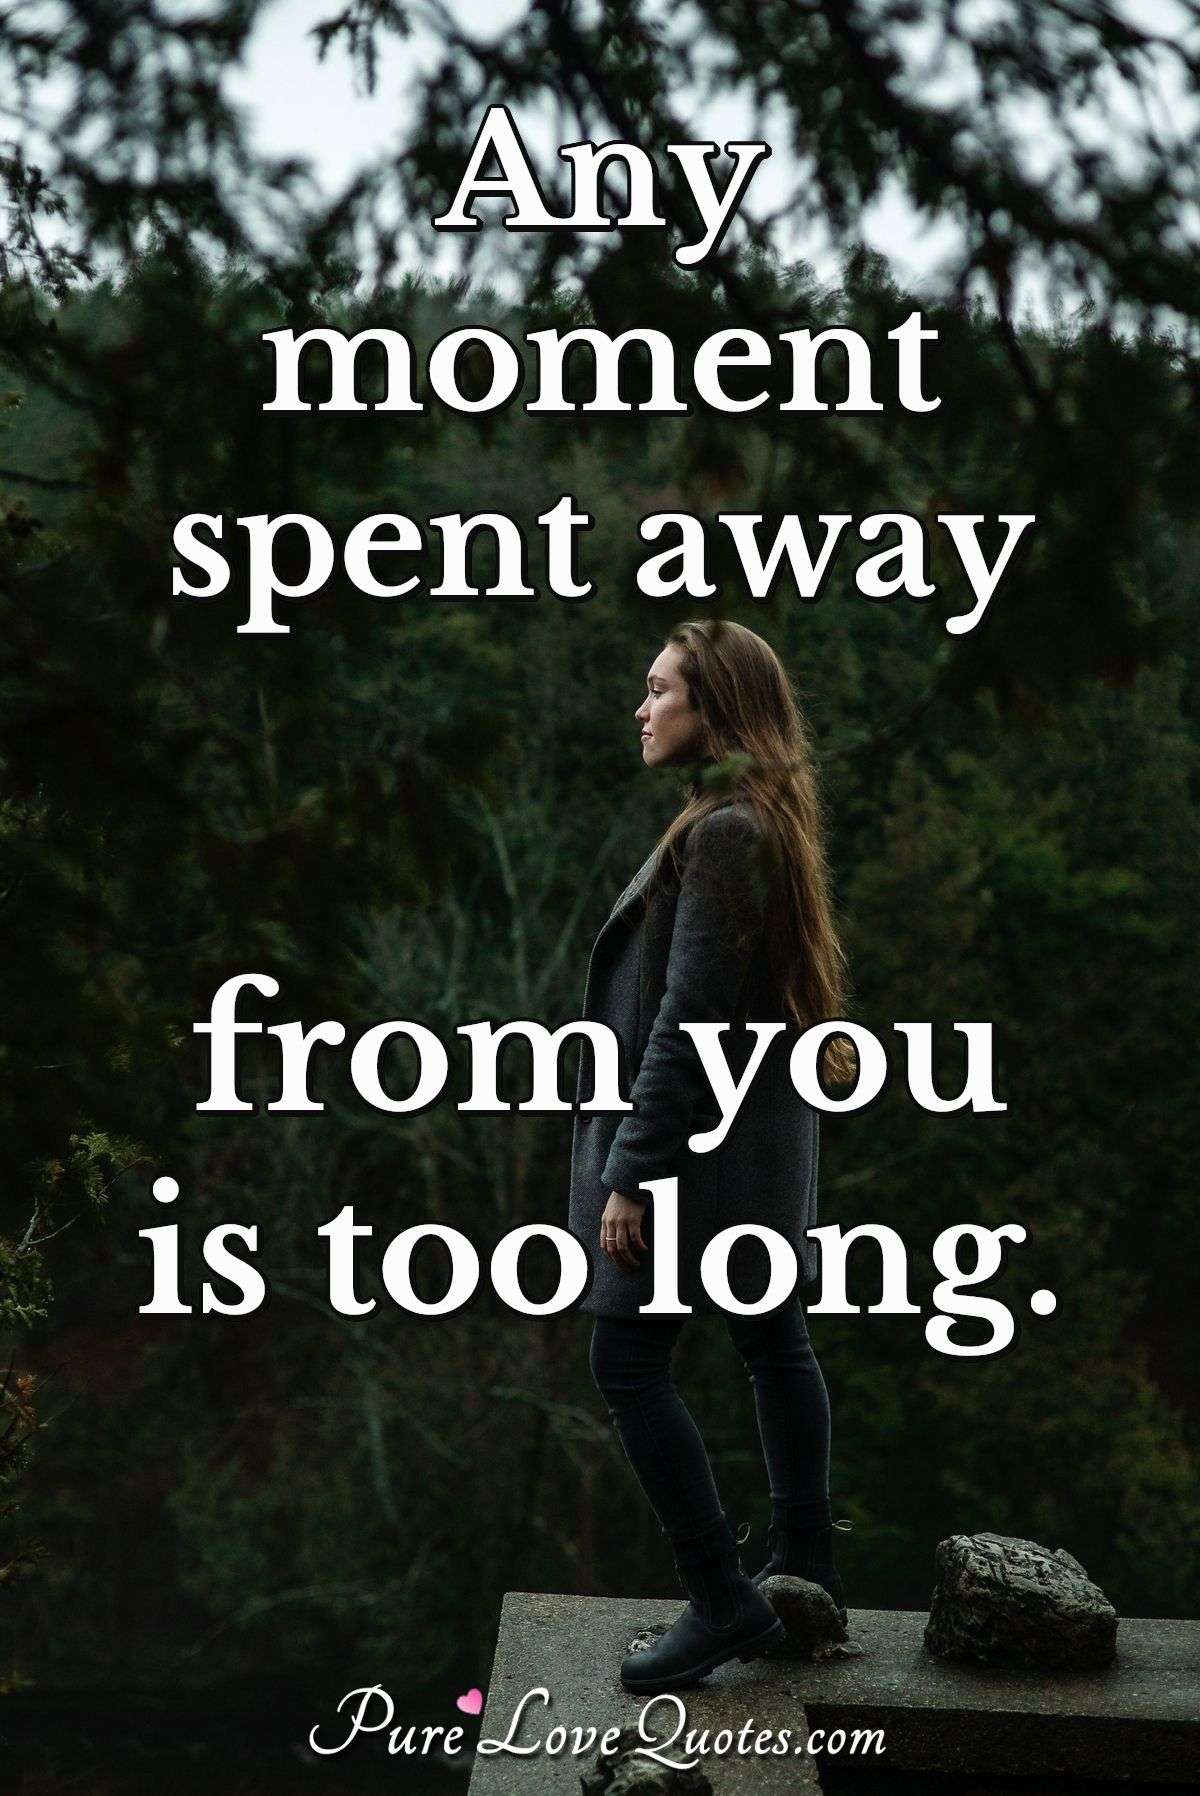 Any moment spent away from you is too long. - Anonymous